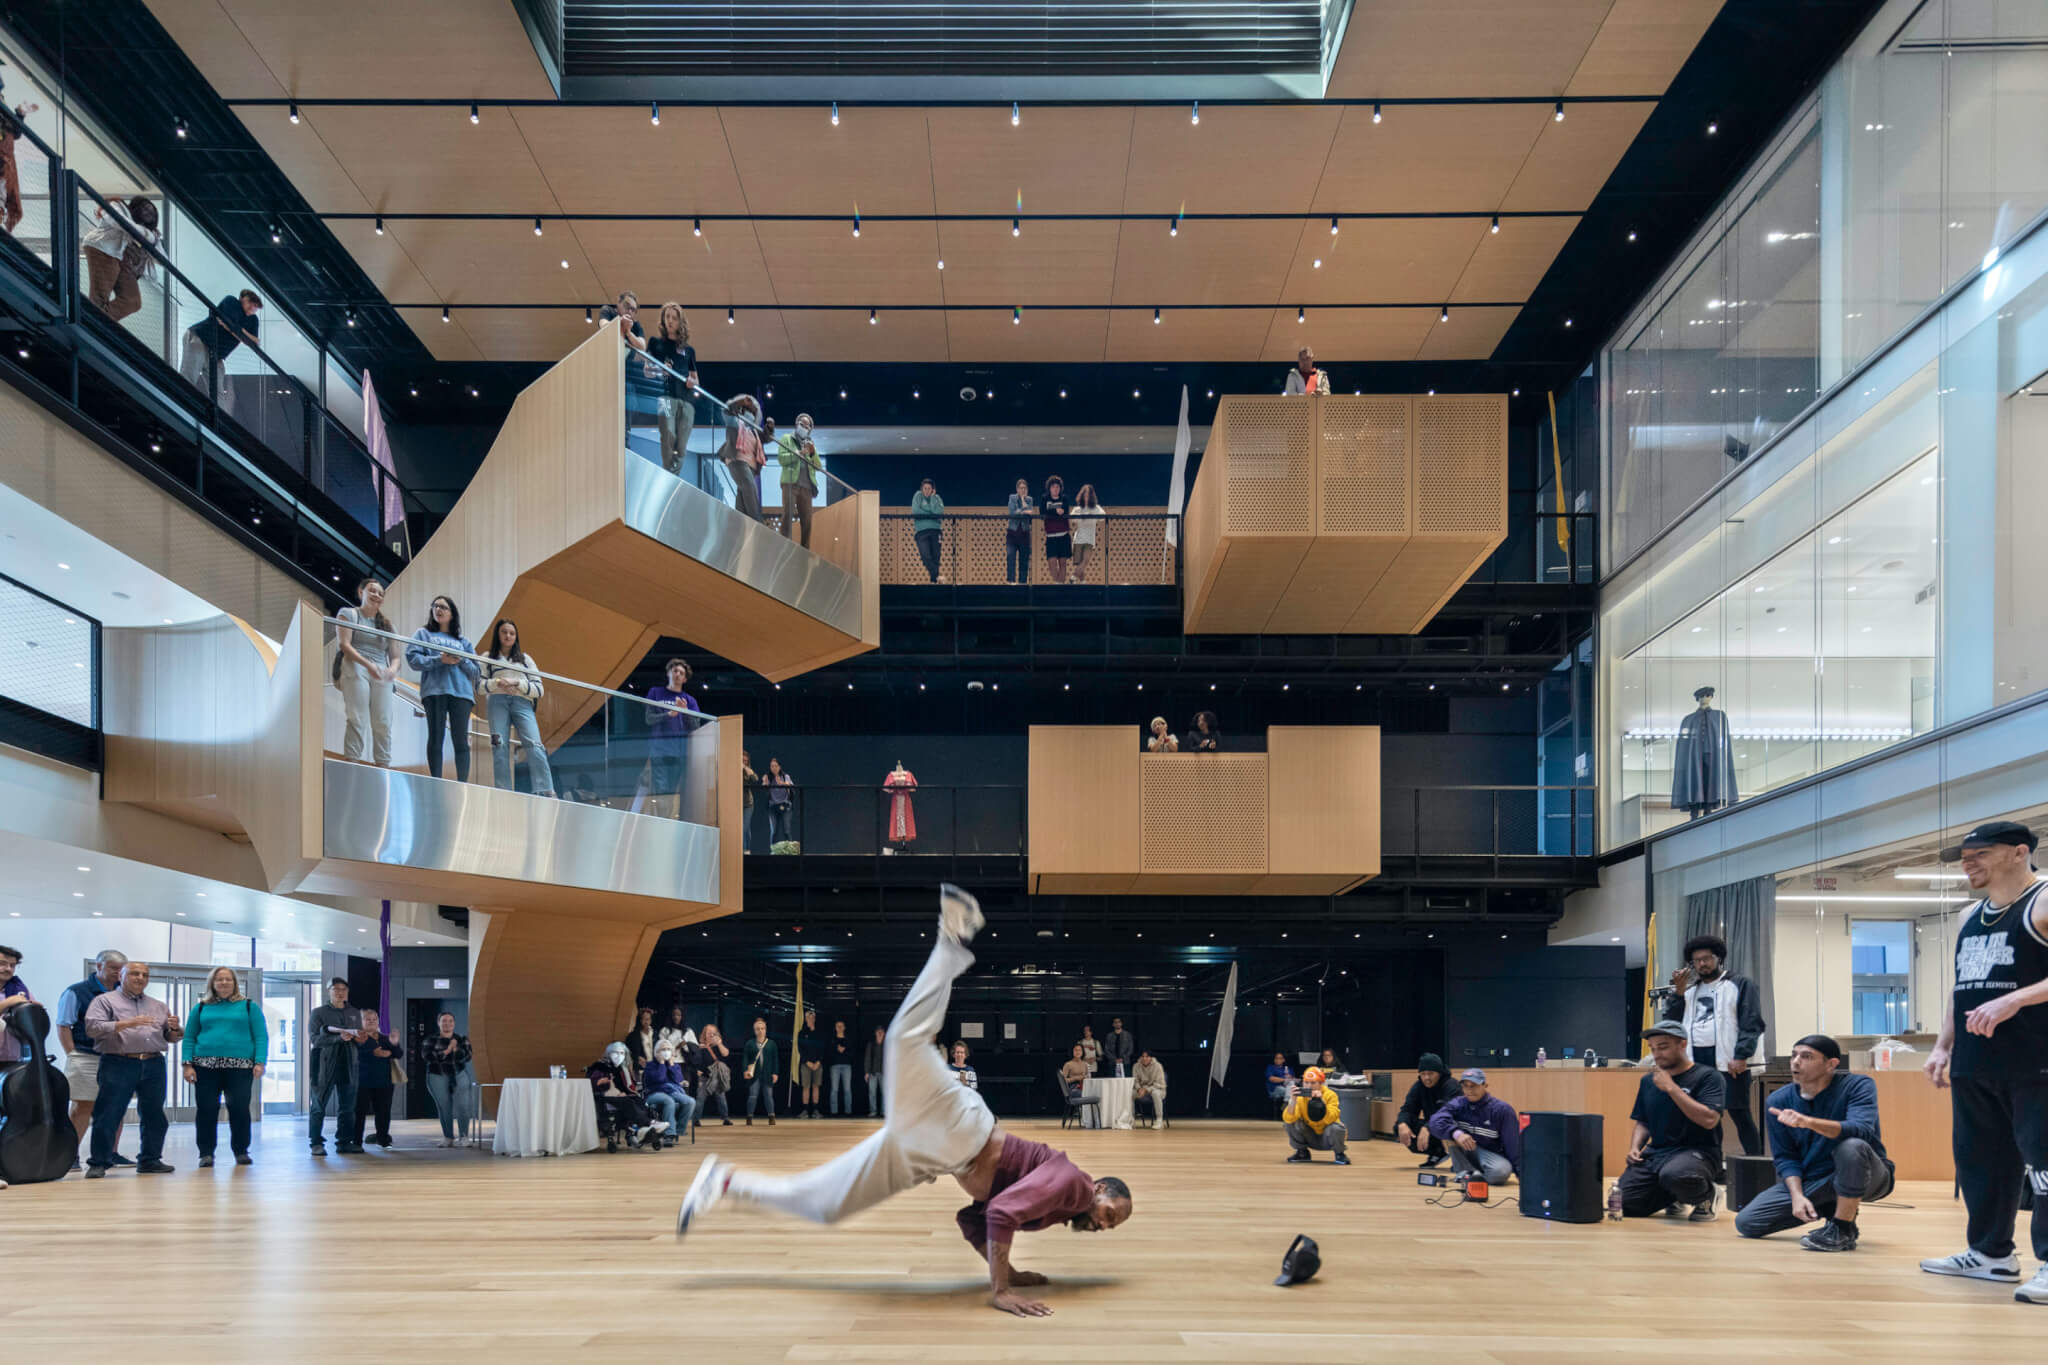 view of a breakdancing performance in a large venue